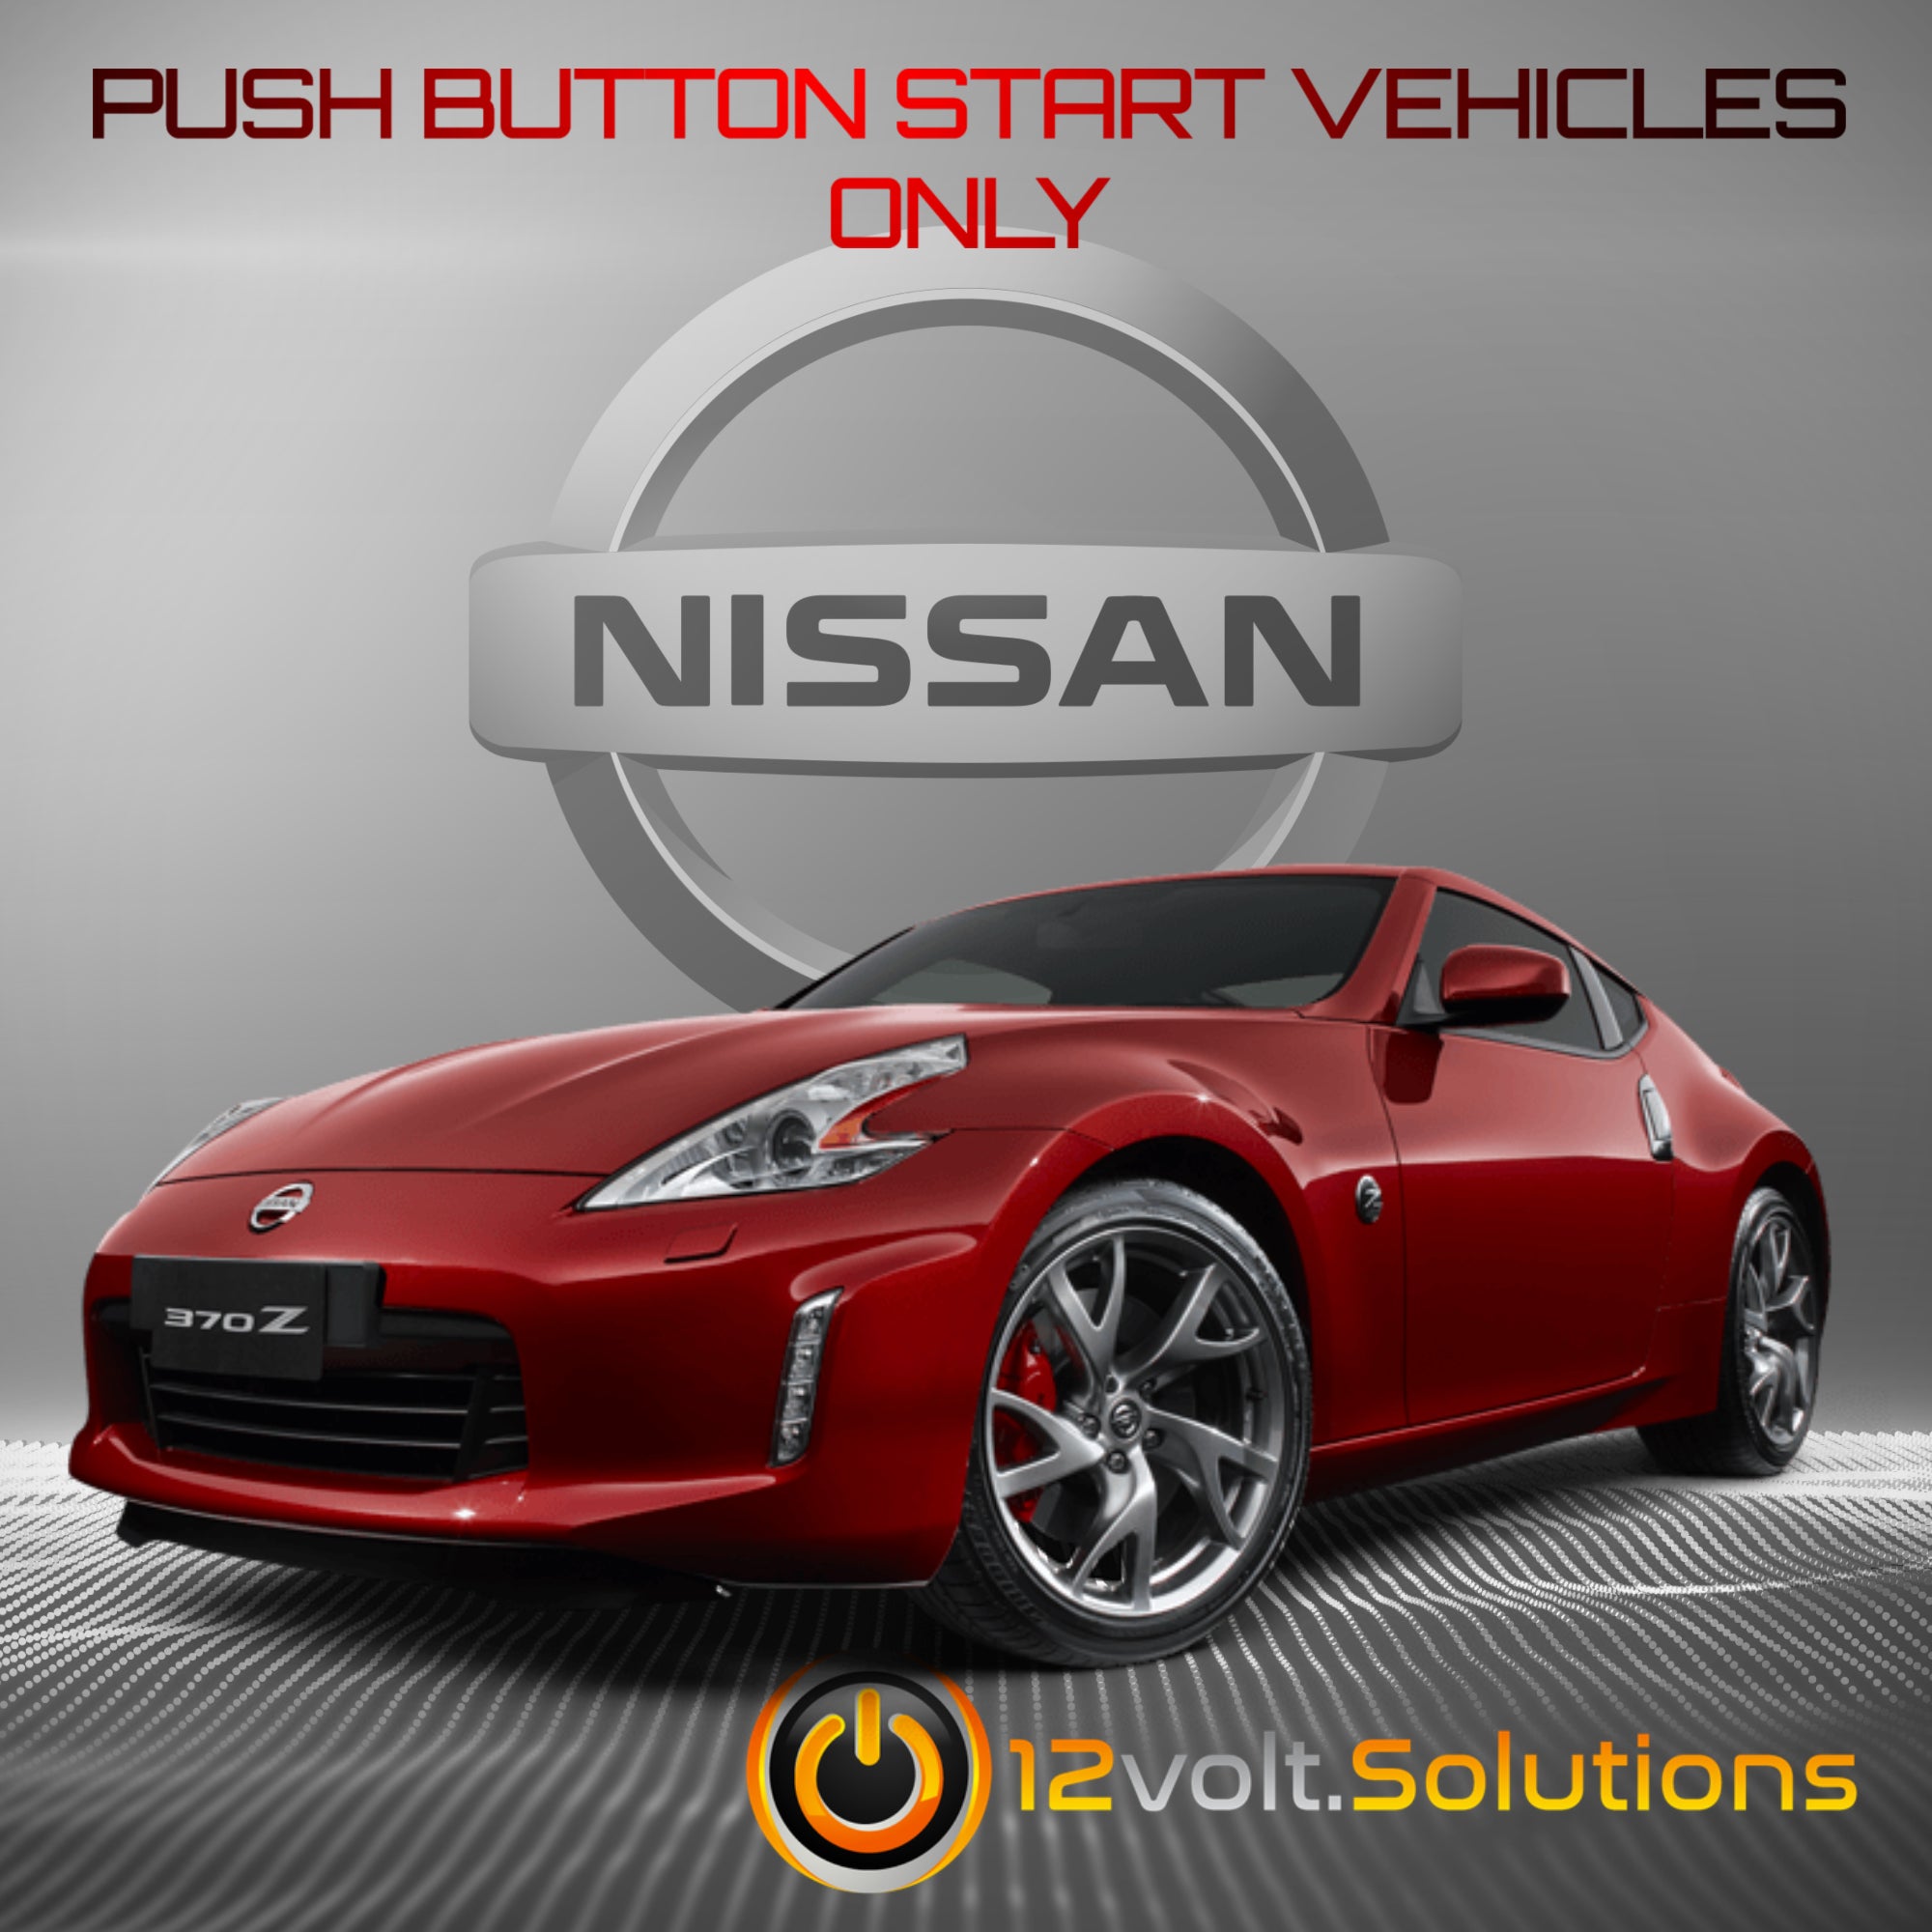 2009-2017 Nissan 370z Remote Start Plug and Play Kit (Push Button Start)-12Volt.Solutions